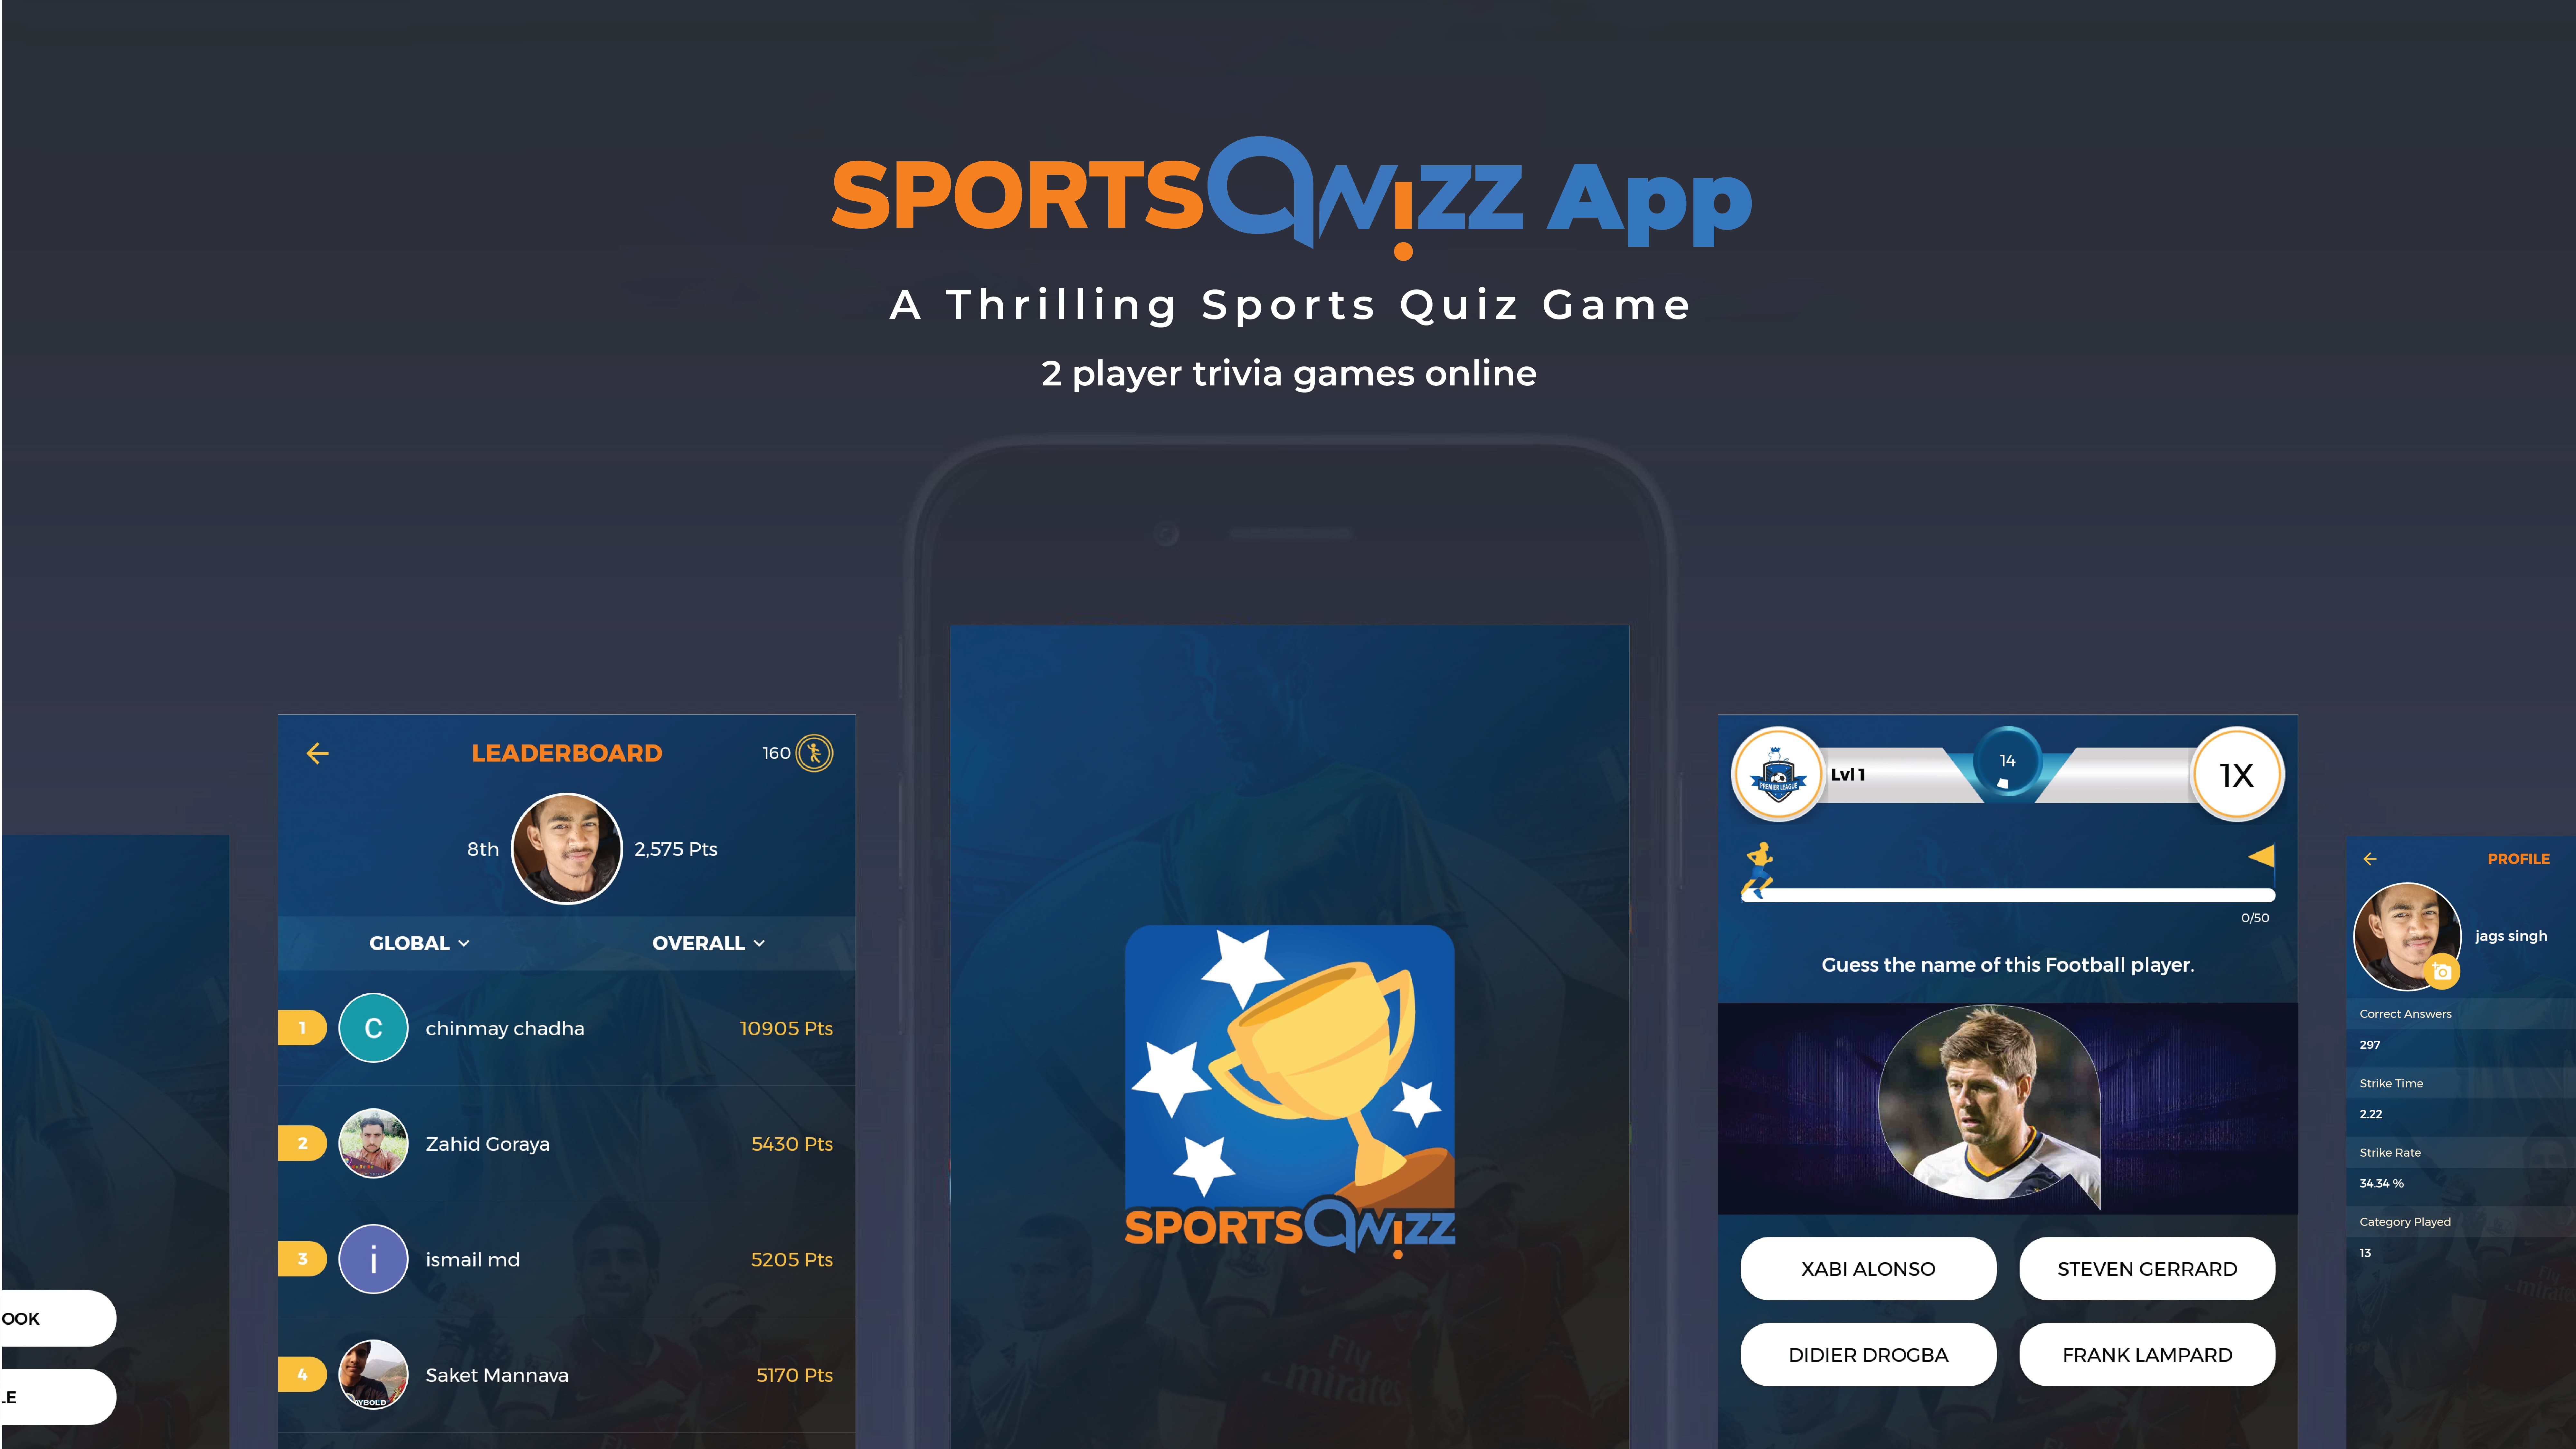 How About Testing Out Your Sports Trivia An Online Trivia Games Multiplayer Sportsqwizz